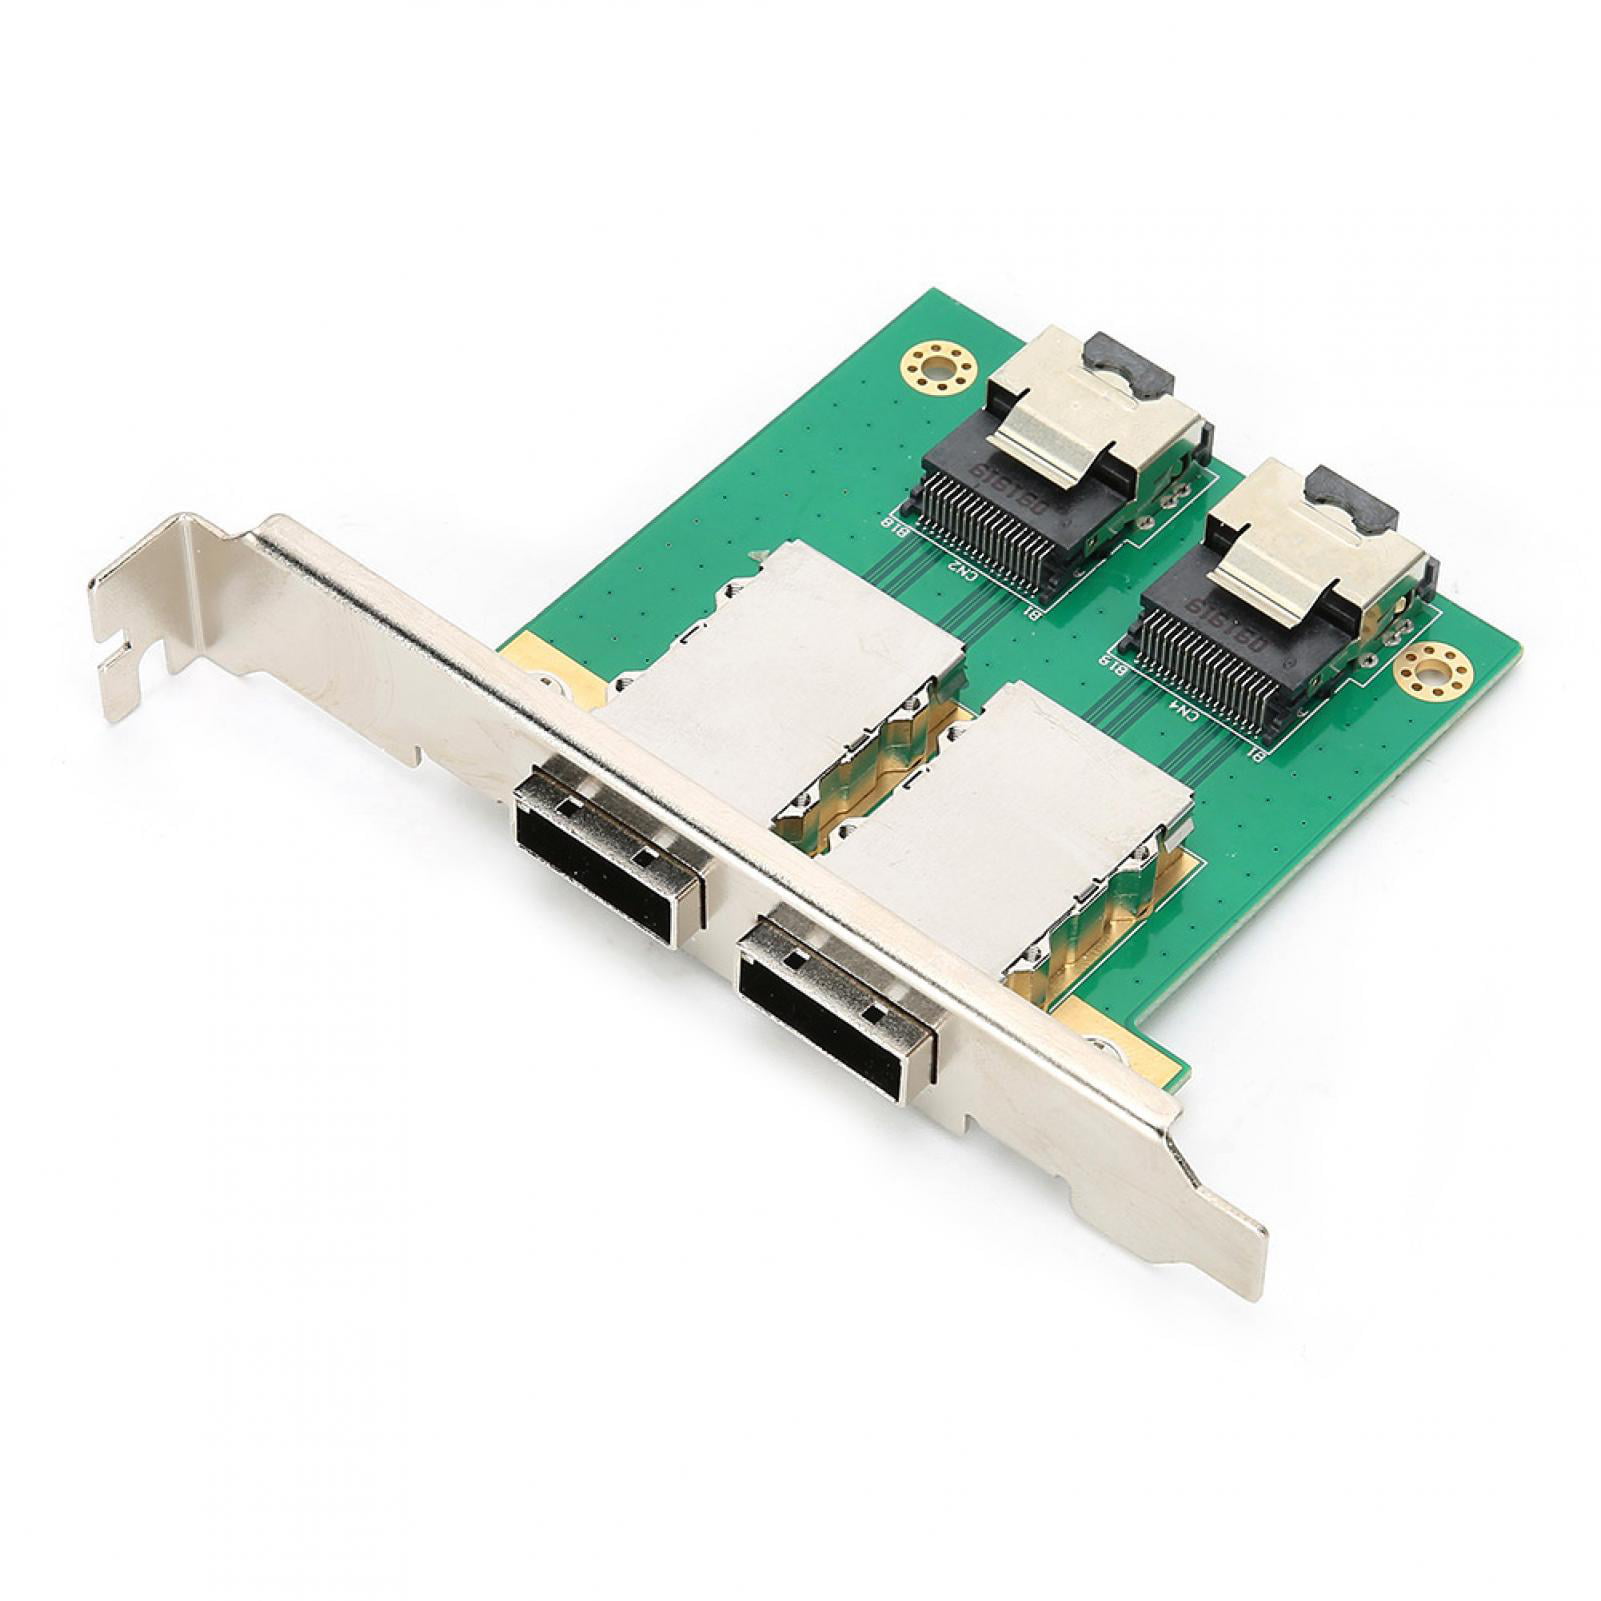 Adapter Card Mini SAS 6 GB/s Internal External Electronic Transfer H0305 MINISAS SFF-8087 to SFF-8088 Adapter with Alloy Fixing Frame 